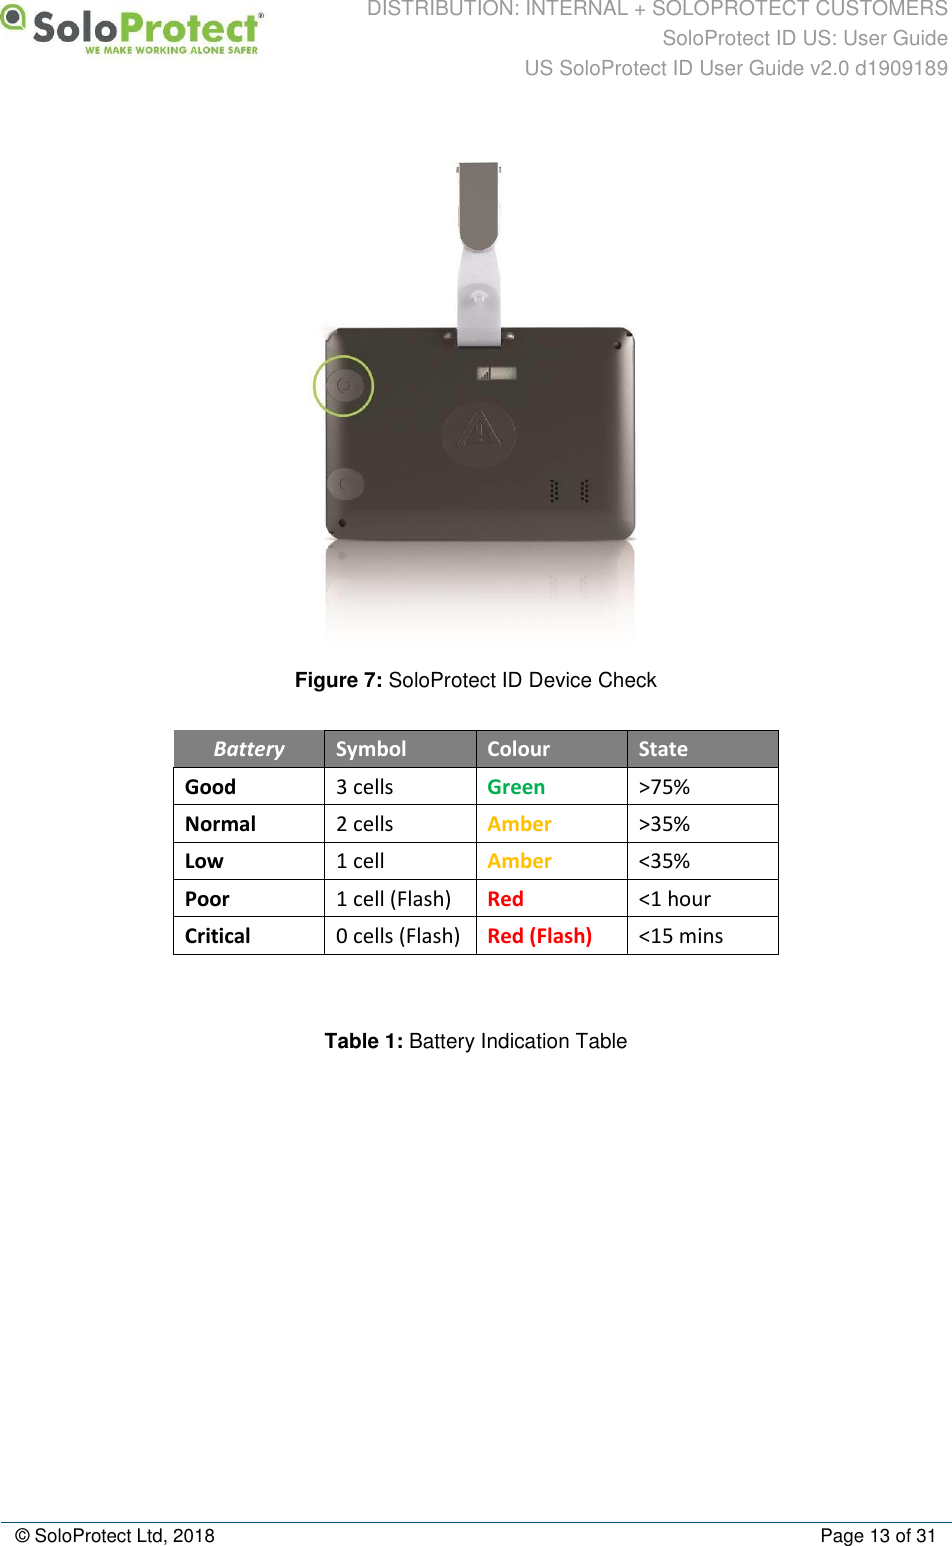 DISTRIBUTION: INTERNAL + SOLOPROTECT CUSTOMERS SoloProtect ID US: User Guide US SoloProtect ID User Guide v2.0 d1909189  © SoloProtect Ltd, 2018  Page 13 of 31  Figure 7: SoloProtect ID Device Check Battery Symbol Colour State Good 3 cells Green &gt;75% Normal 2 cells Amber &gt;35% Low 1 cell Amber &lt;35% Poor 1 cell (Flash) Red &lt;1 hour Critical 0 cells (Flash) Red (Flash) &lt;15 mins  Table 1: Battery Indication Table 